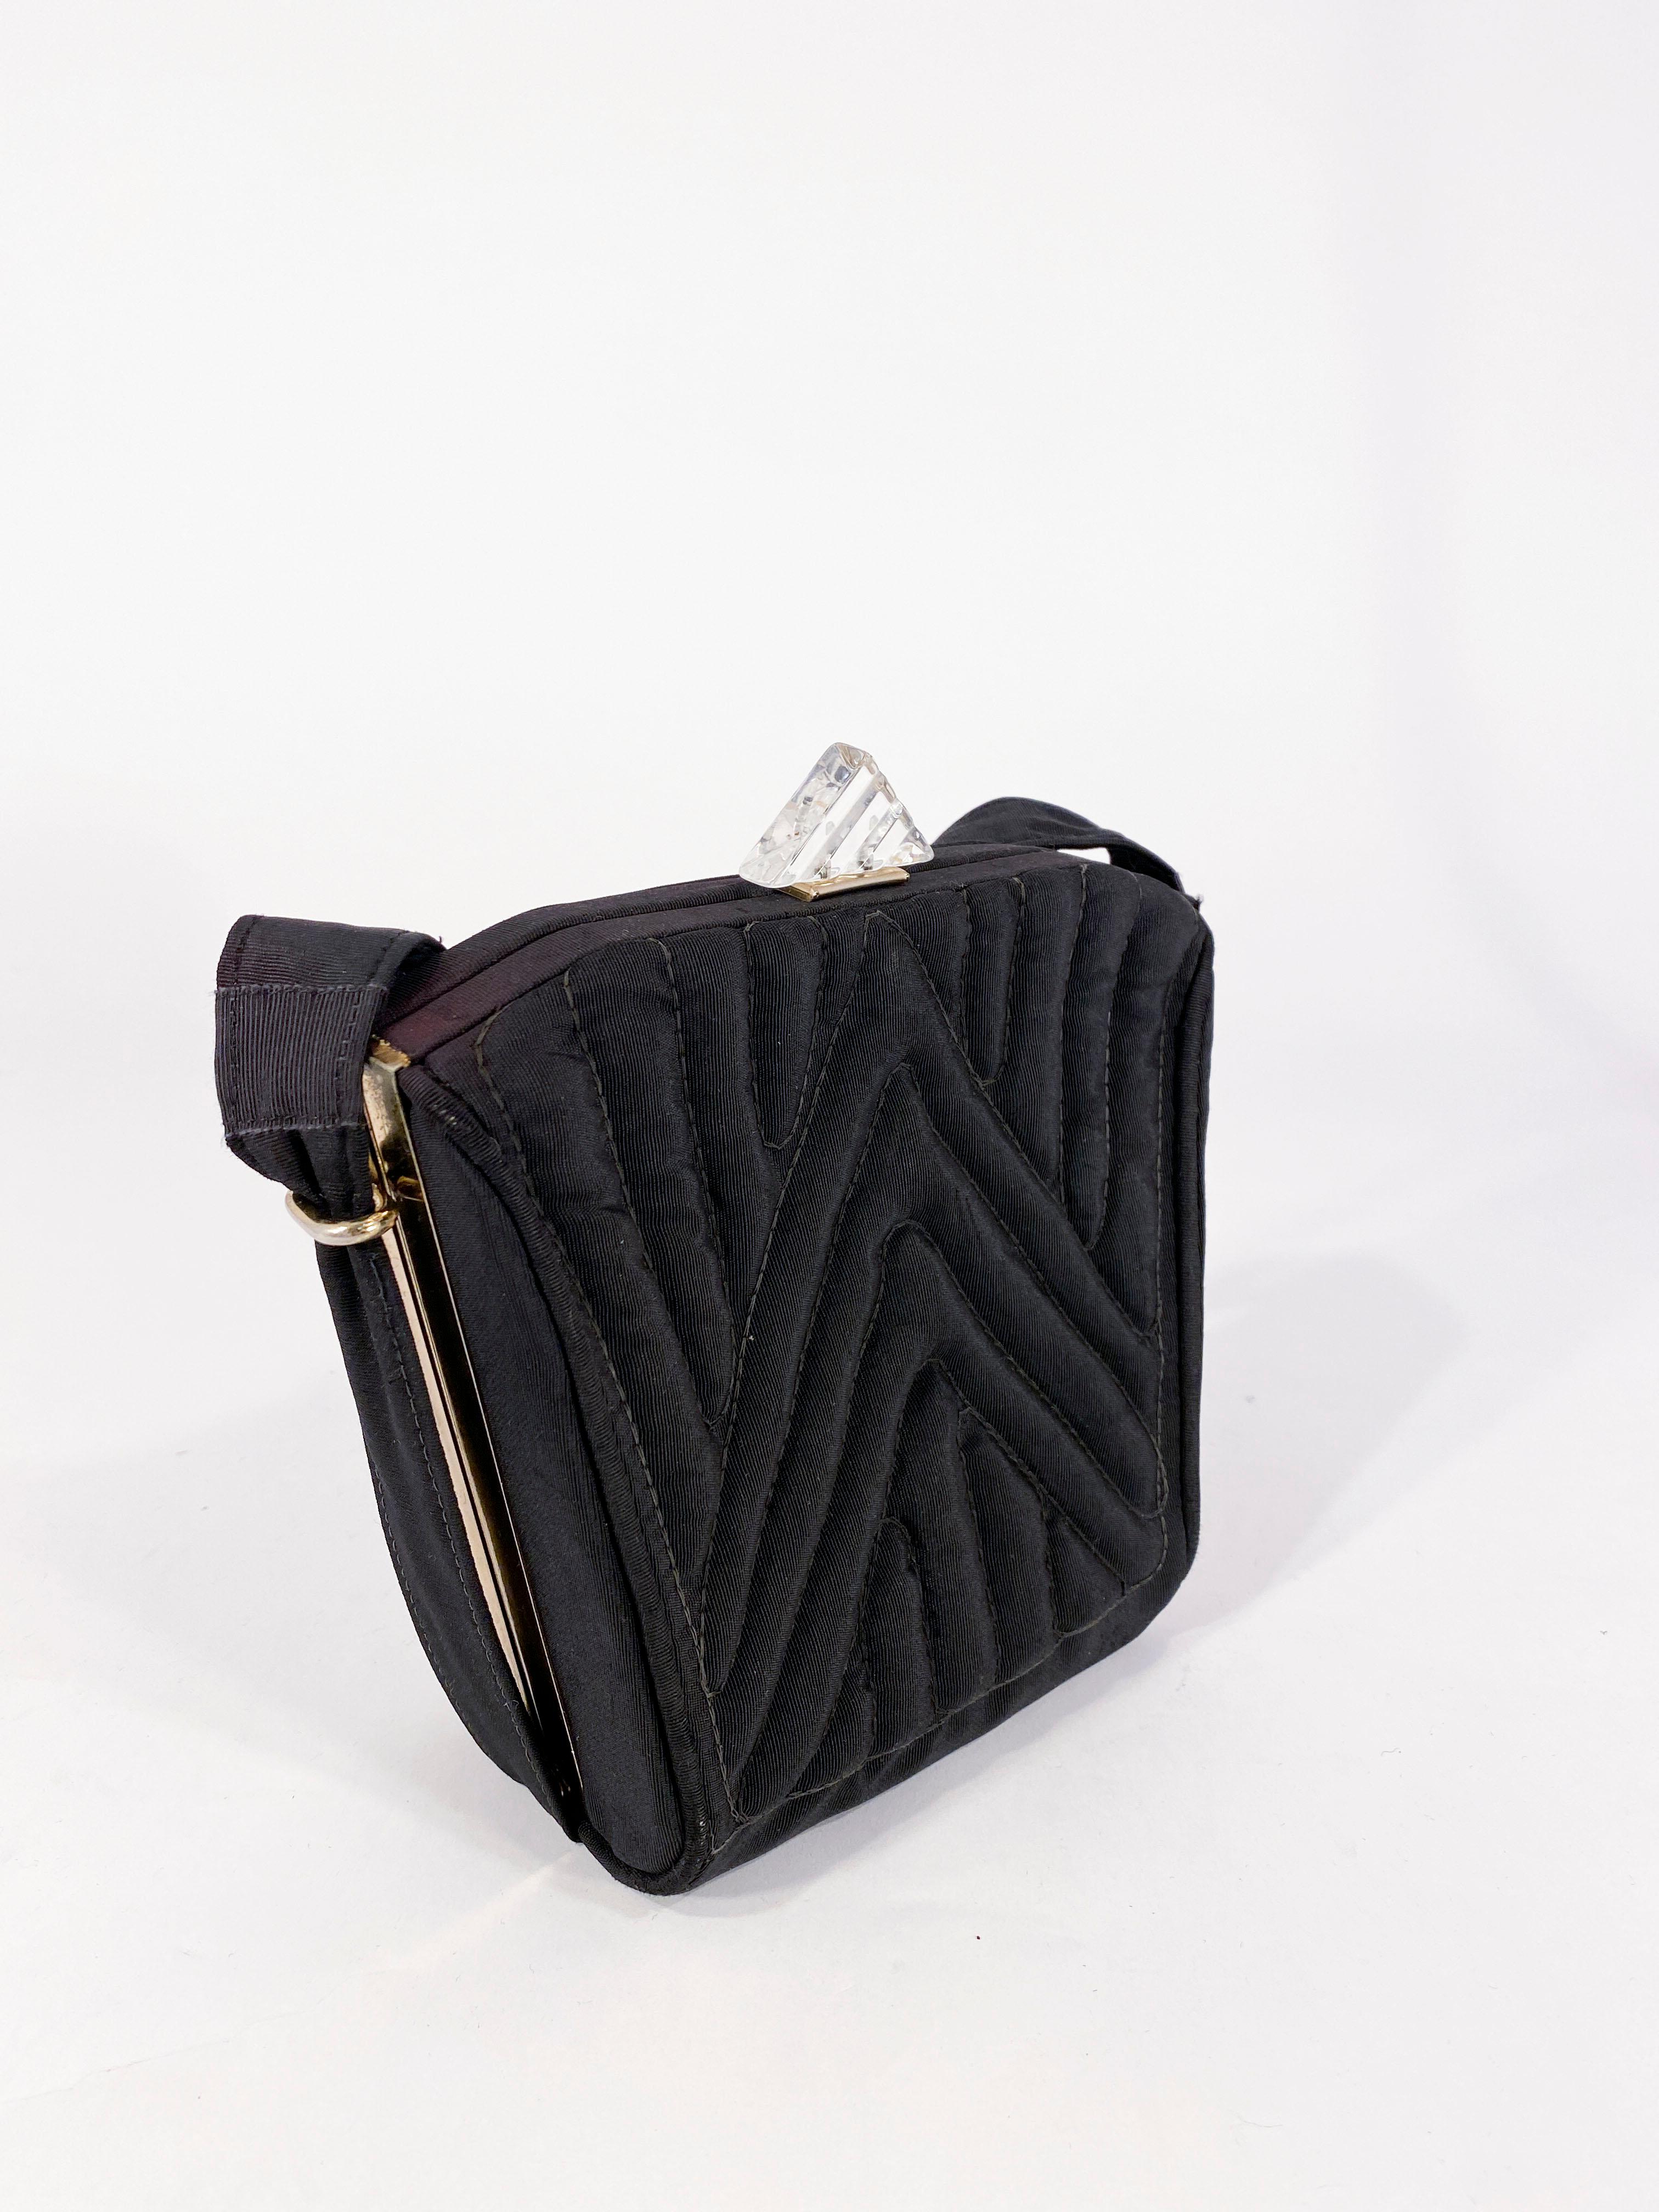 1930s Black Twill Quilted Trapunto Handbag with Lucite Closure In Good Condition For Sale In San Francisco, CA